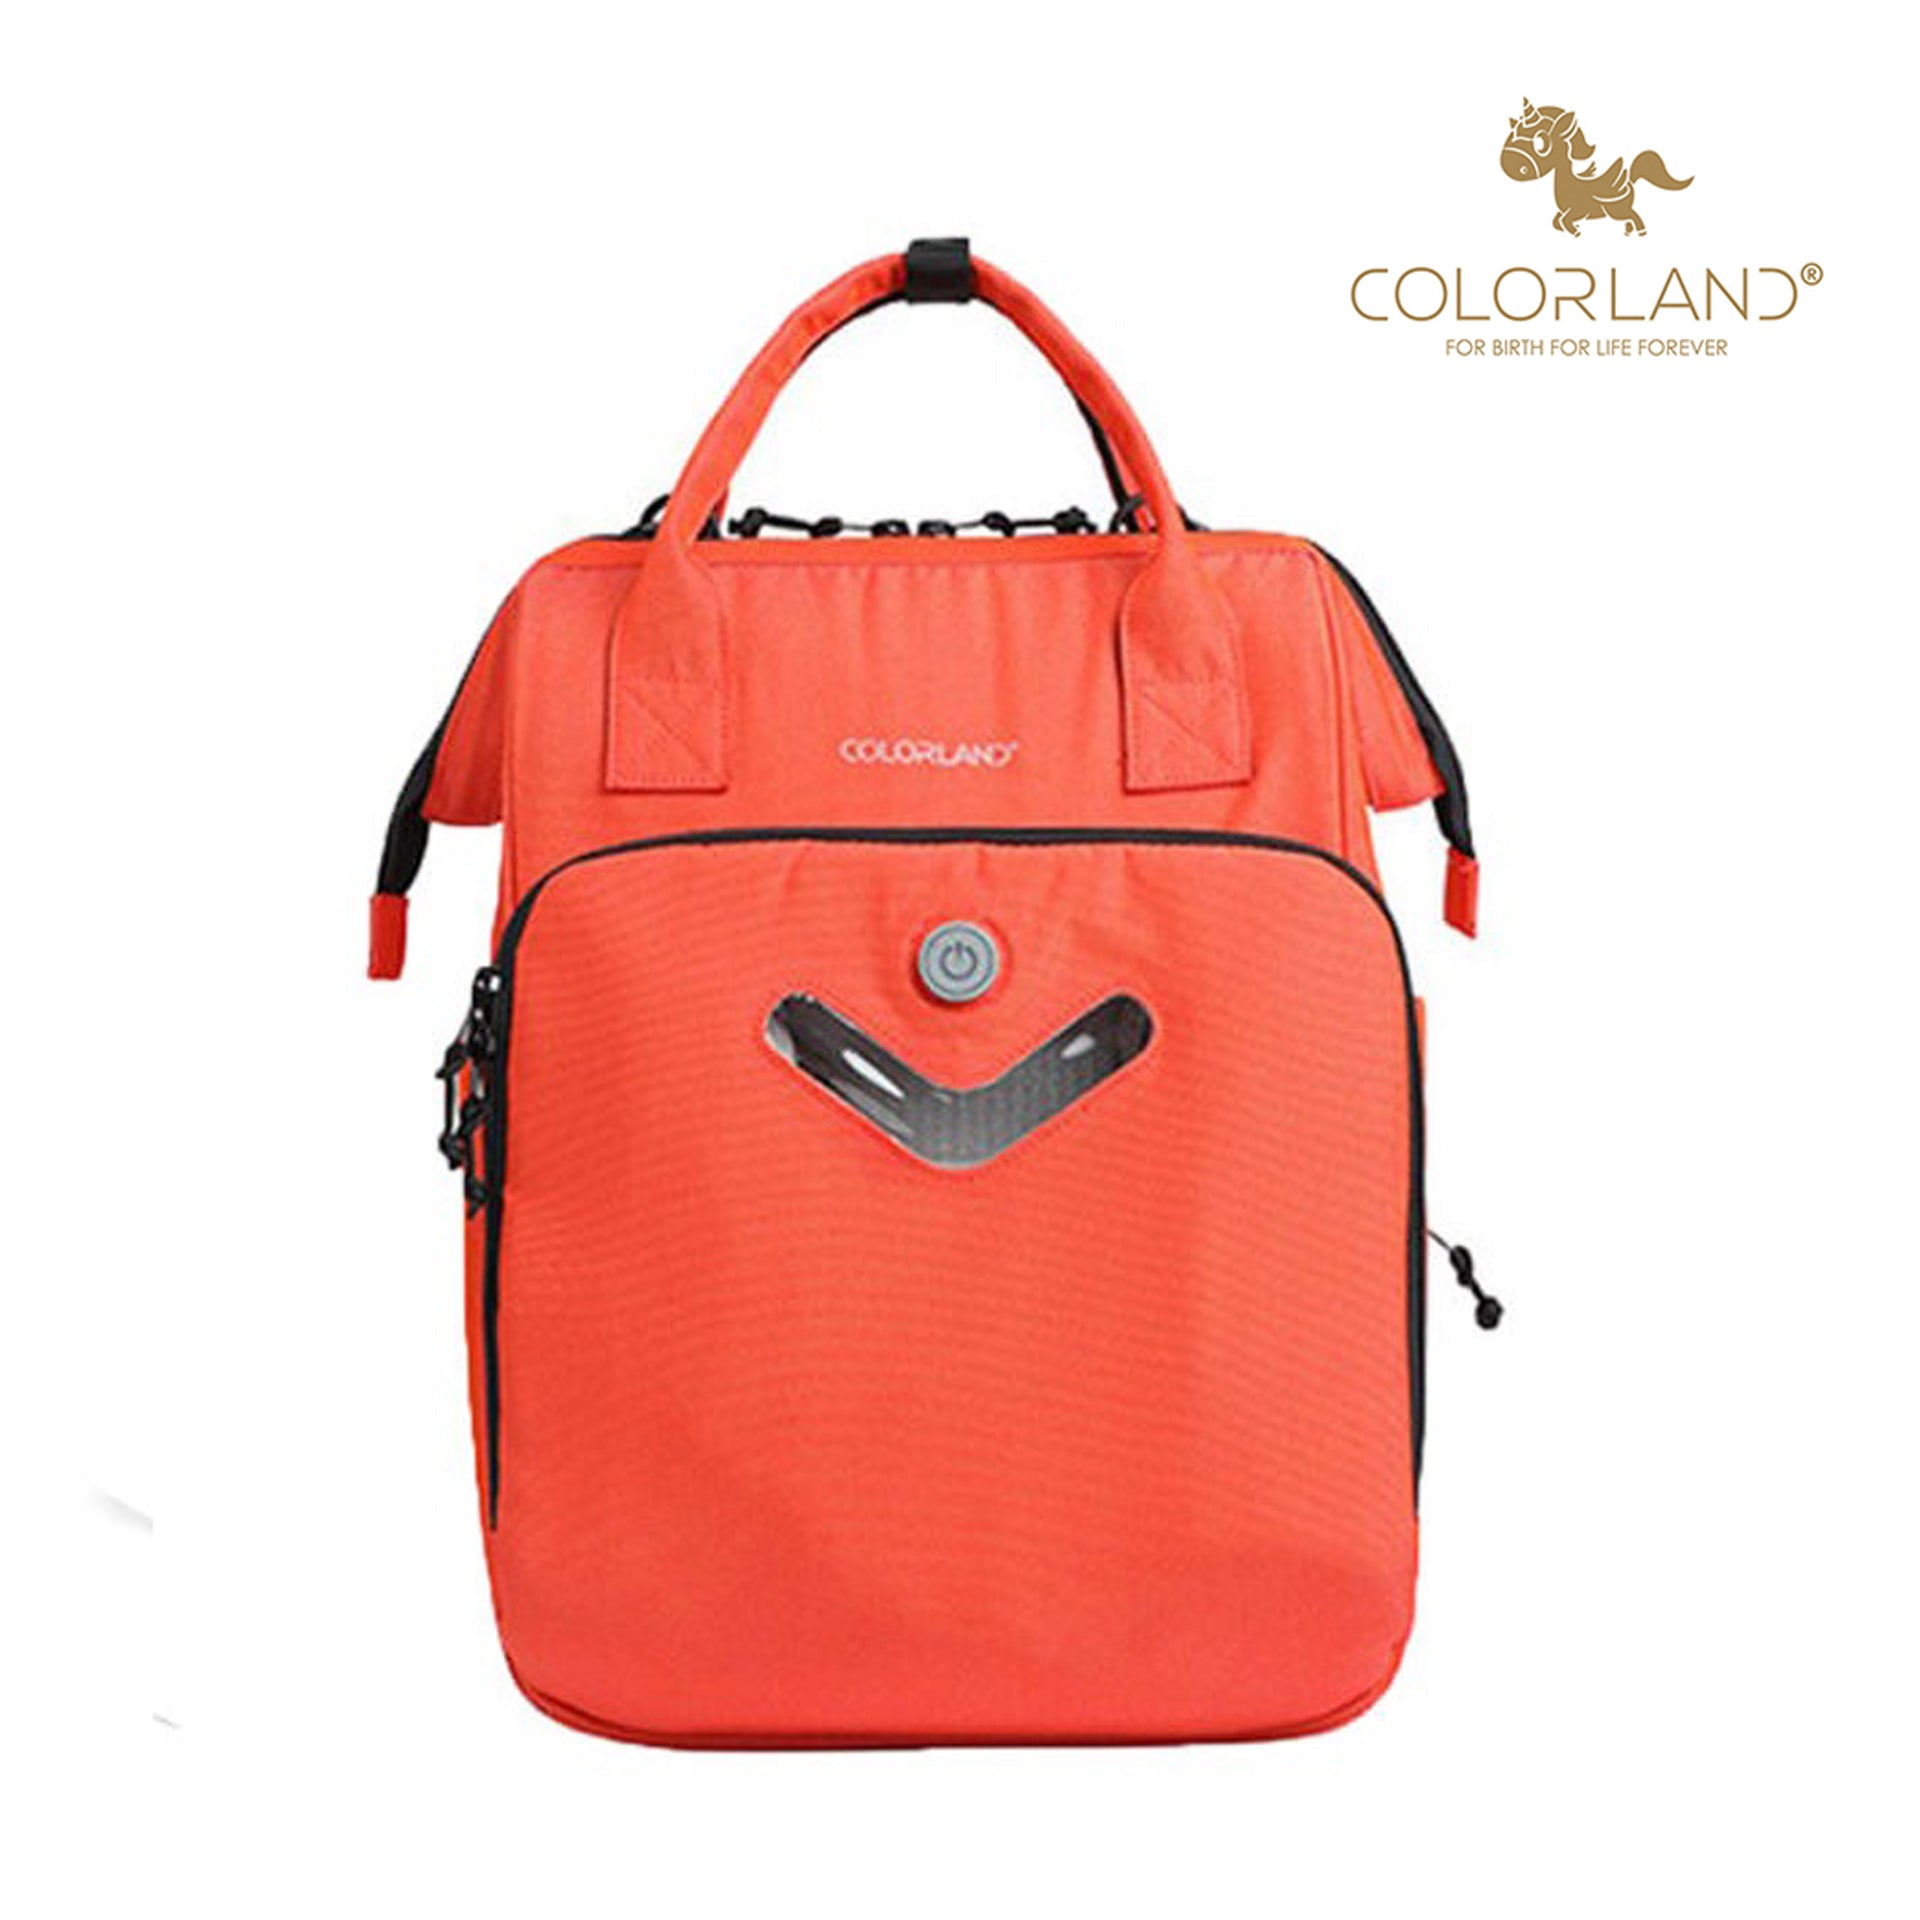 Colorland Backpack with Sterilizing Function using Ozone and Air Purification Technology (BP150-C/Orange)